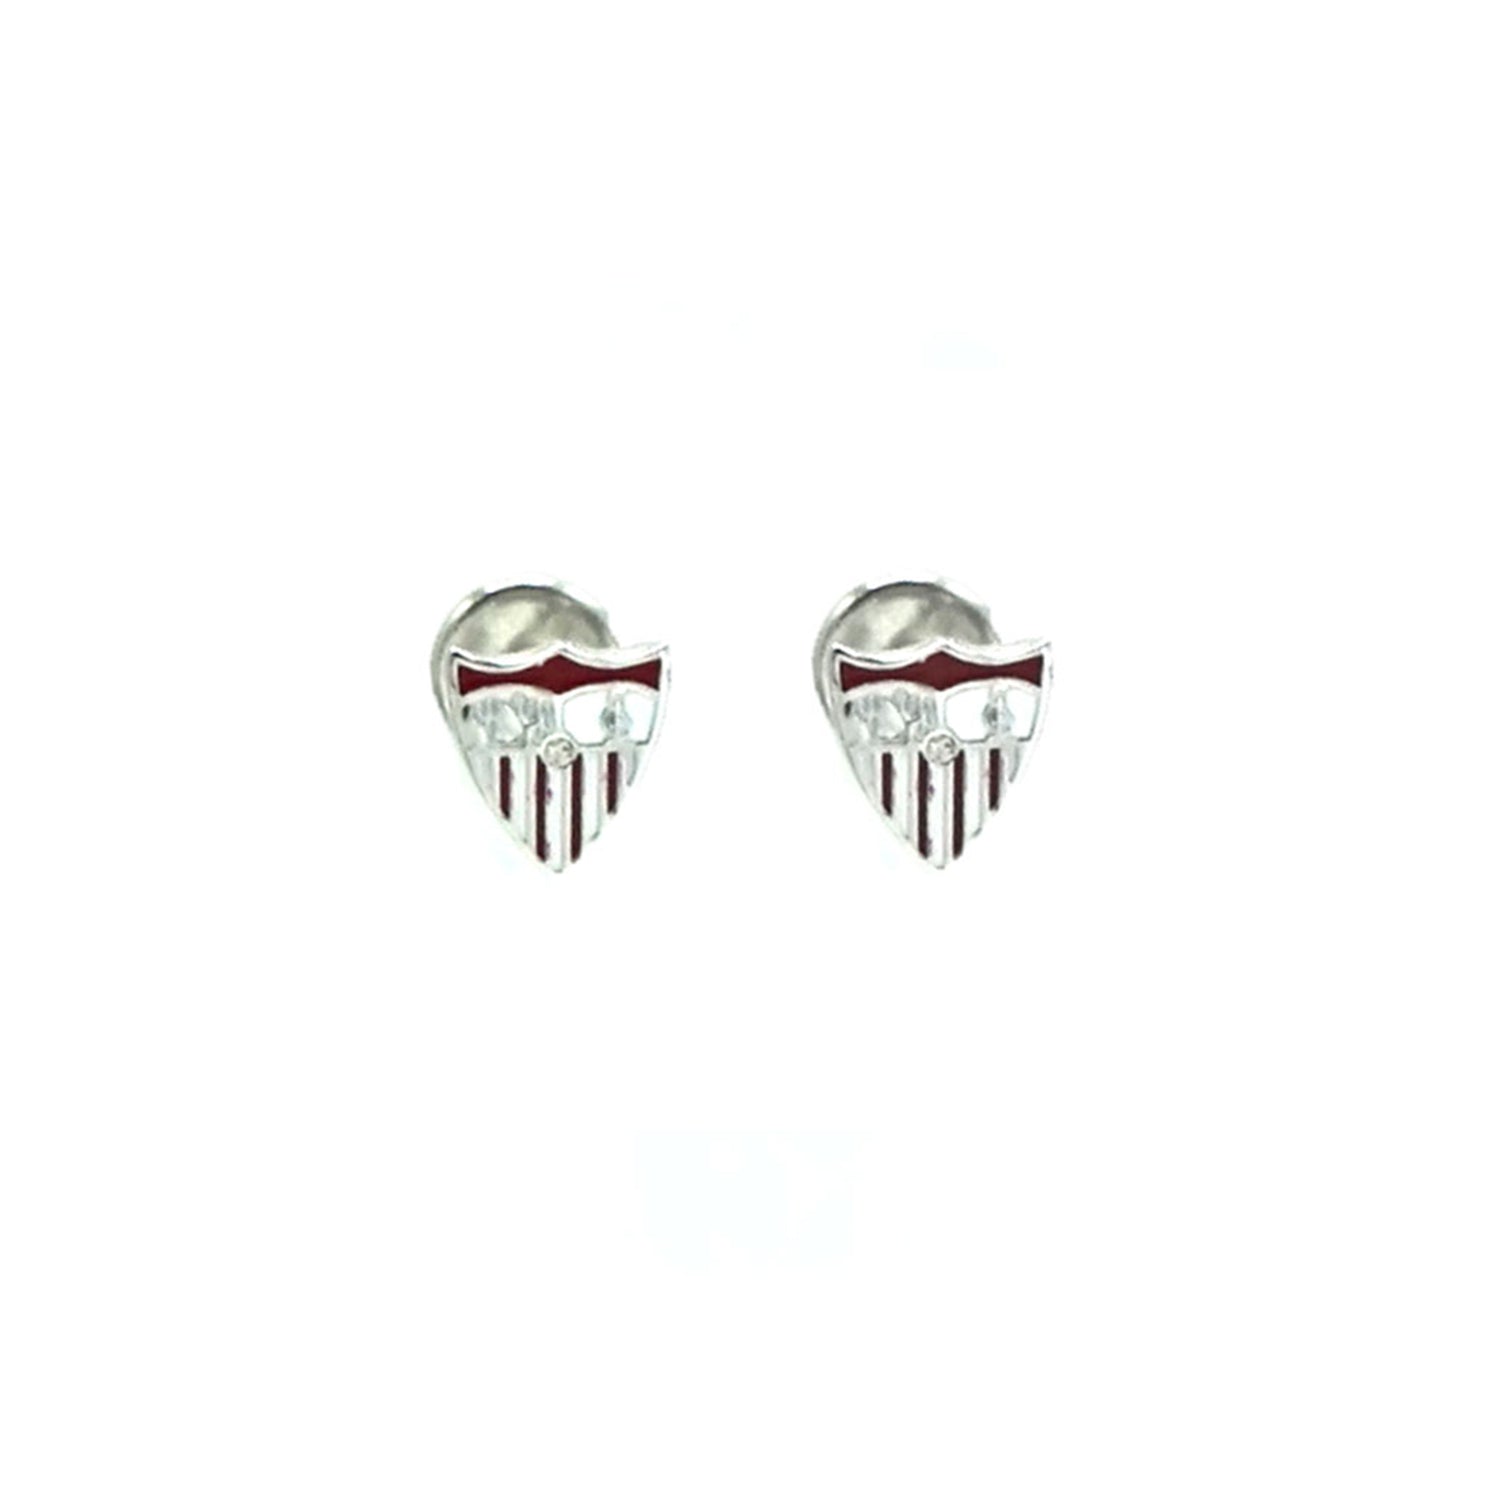 Silver Crest color earrings